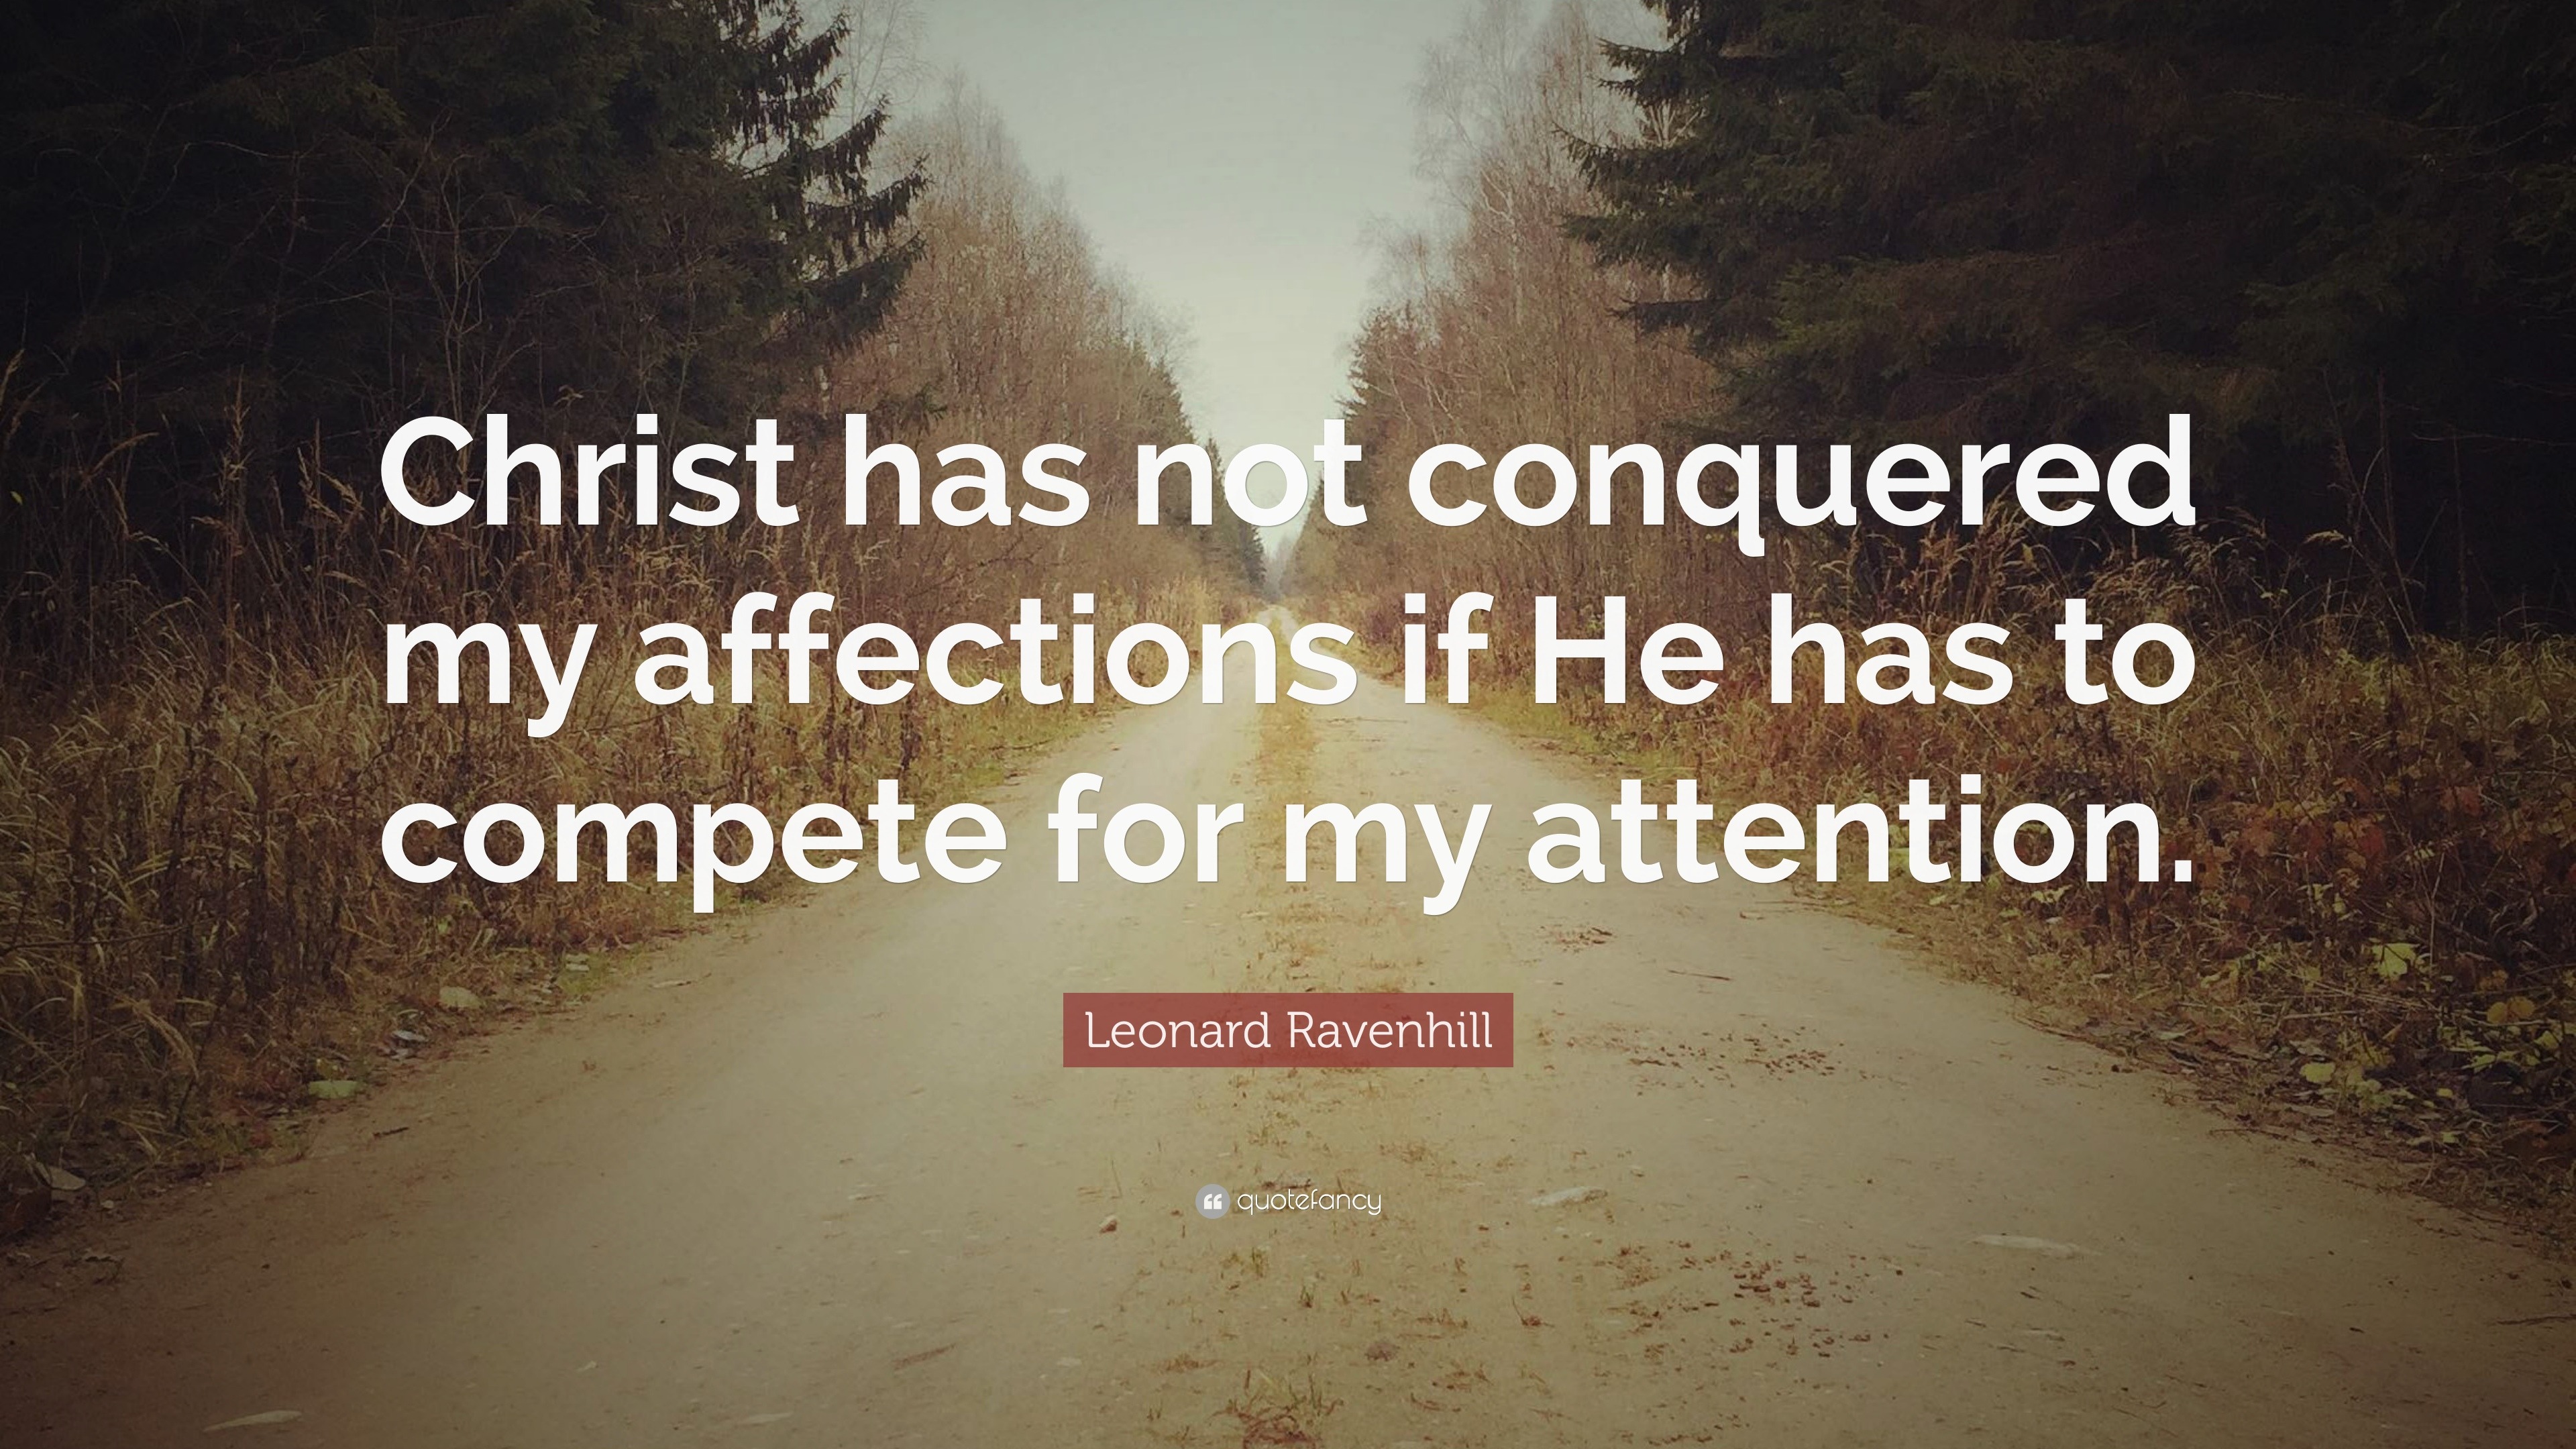 Leonard Ravenhill Quotes (100 wallpapers) - Quotefancy